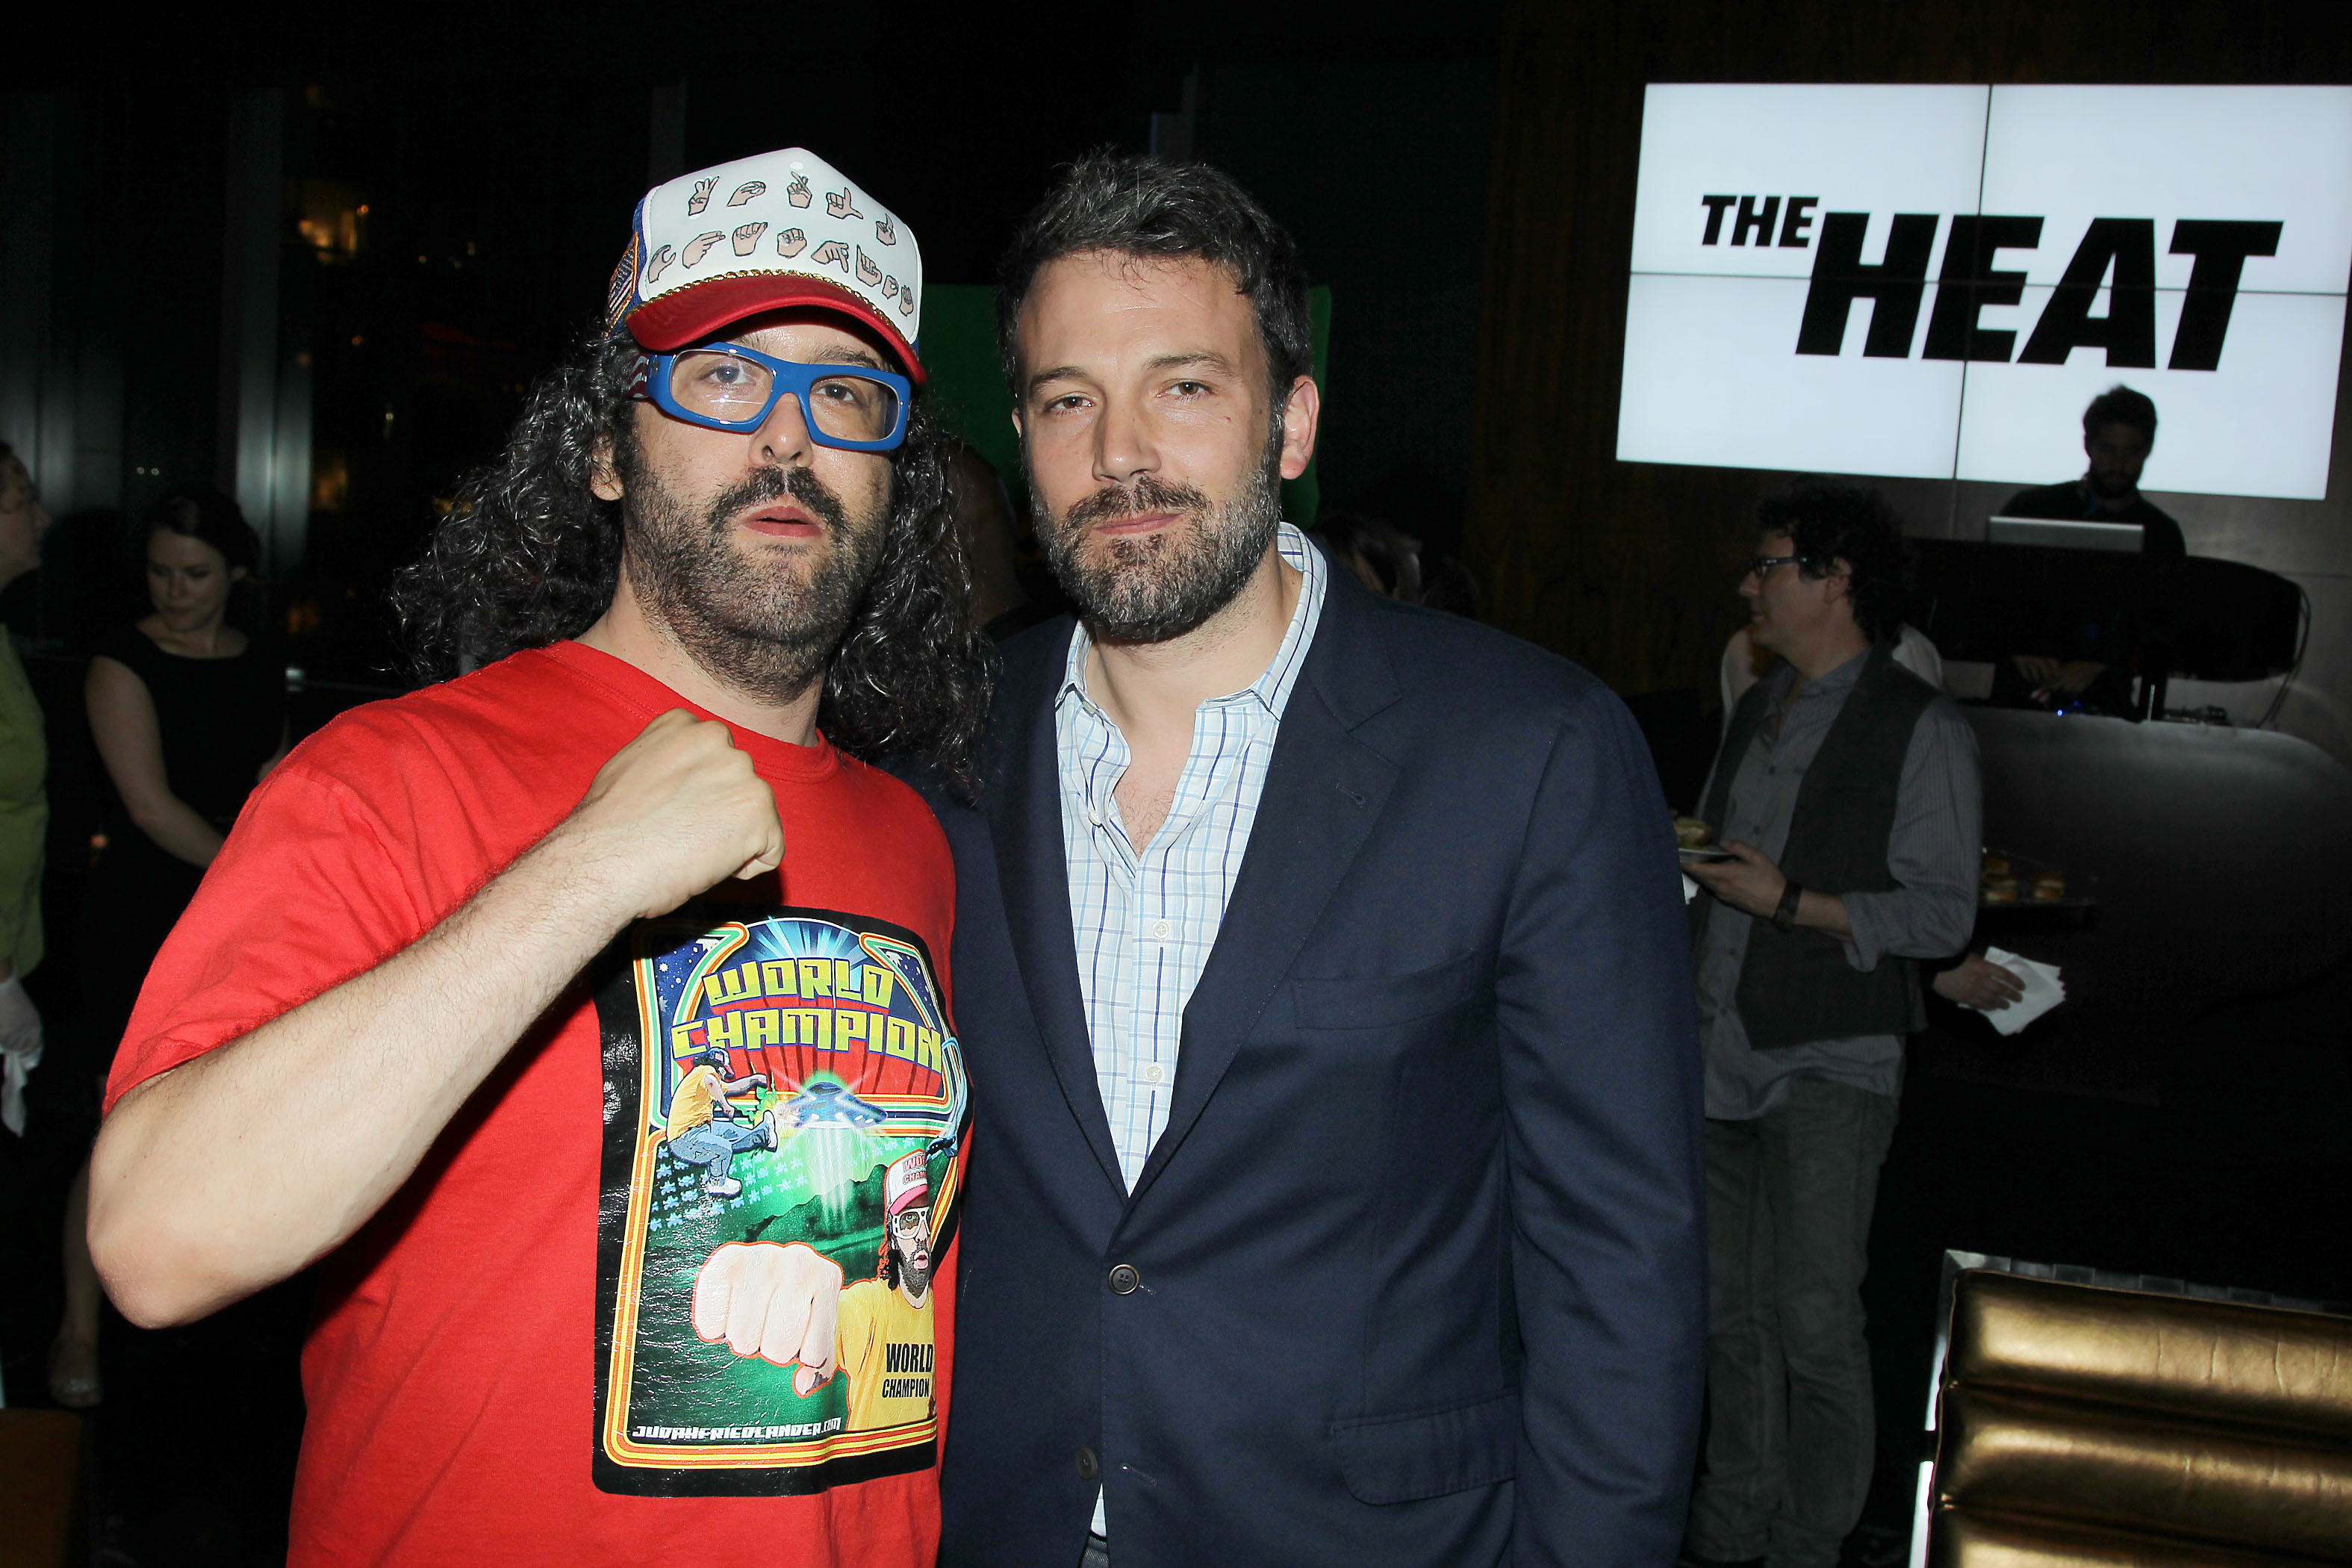 Judah Friedlander, Ben Affleck - 20th Century Fox Presents the New York Premiere After Party for "THE HEAT", Hosted by C. Wonder at Stone Rose Lounge